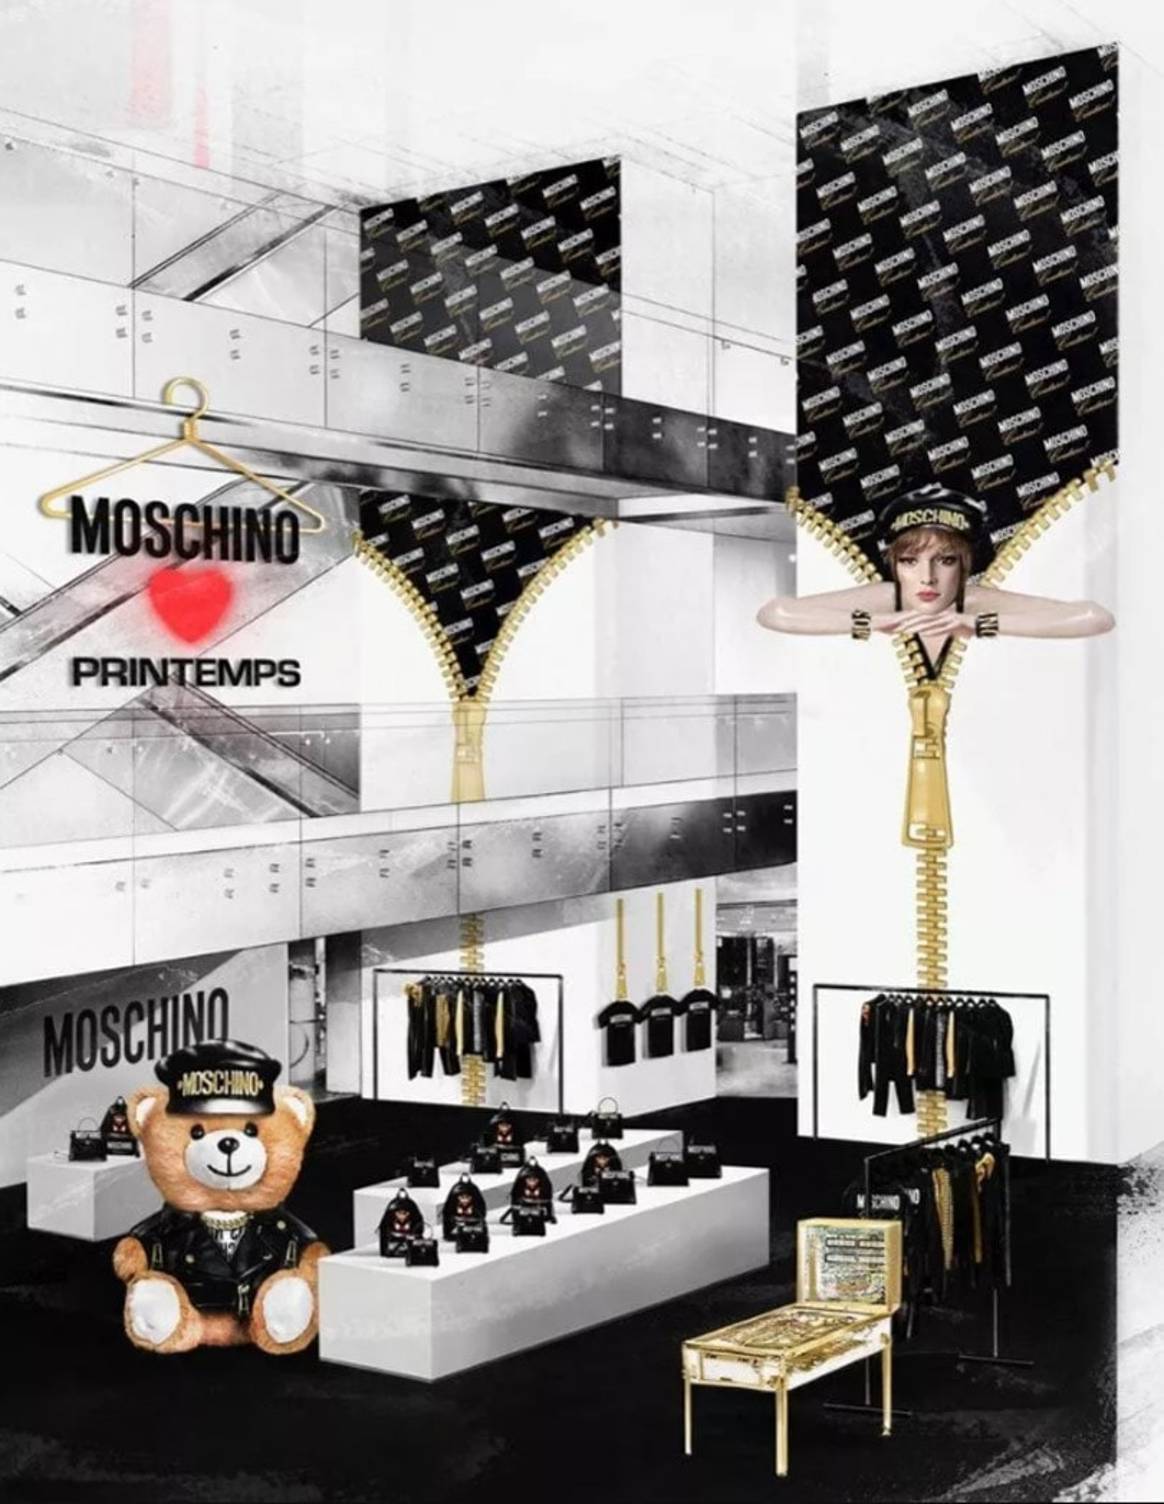 H&M to collaborate with Moschino